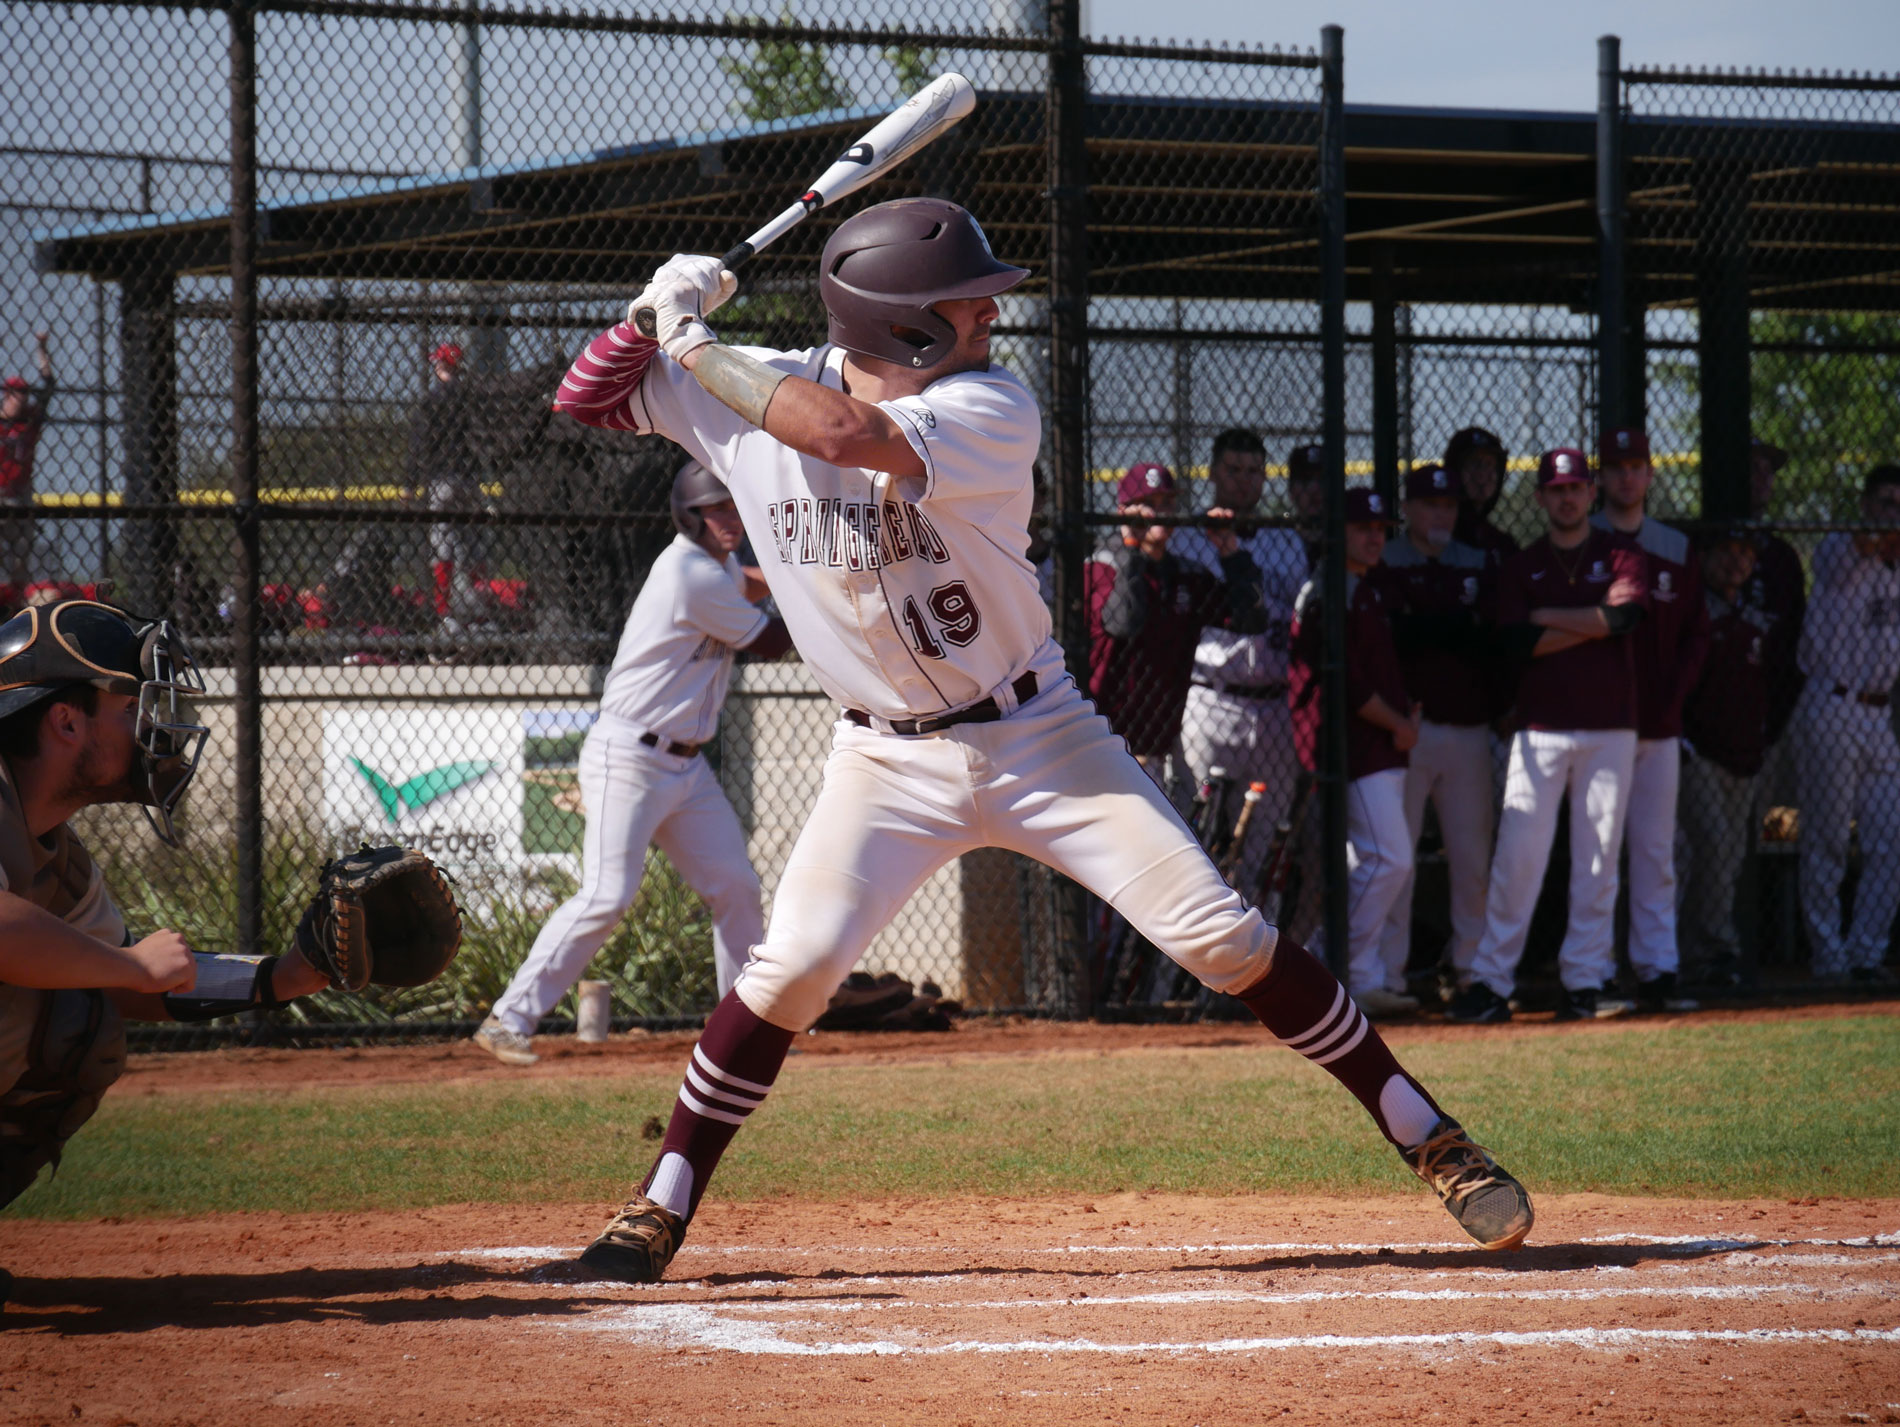 A baseball player prepares to swing the bat at Springfield College